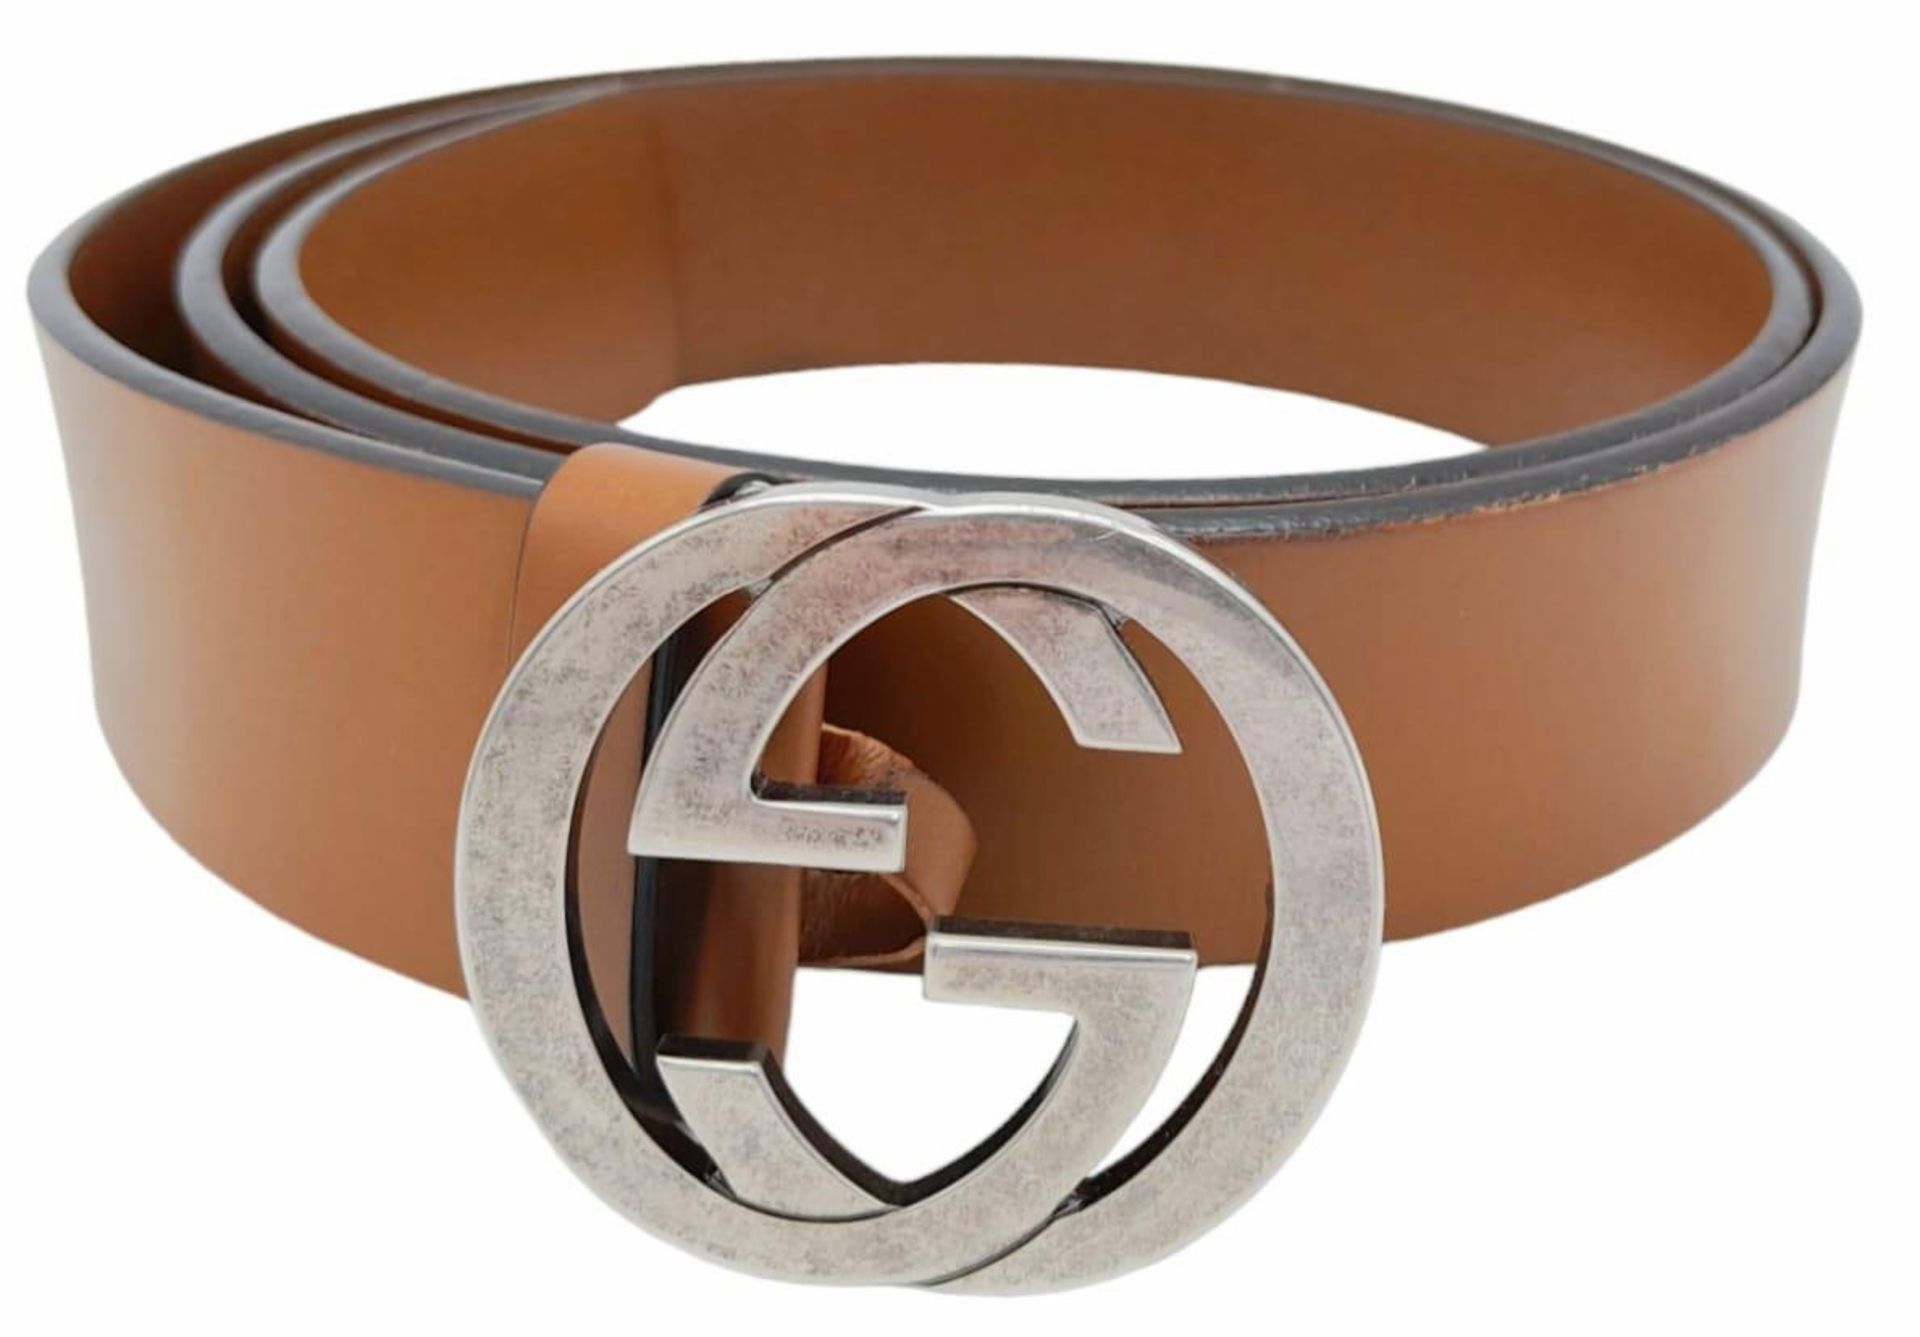 A Gucci Interlocking GG Signature Leather Belt. Brown Calfskin Leather, Silver Tone Hardware. - Image 2 of 6